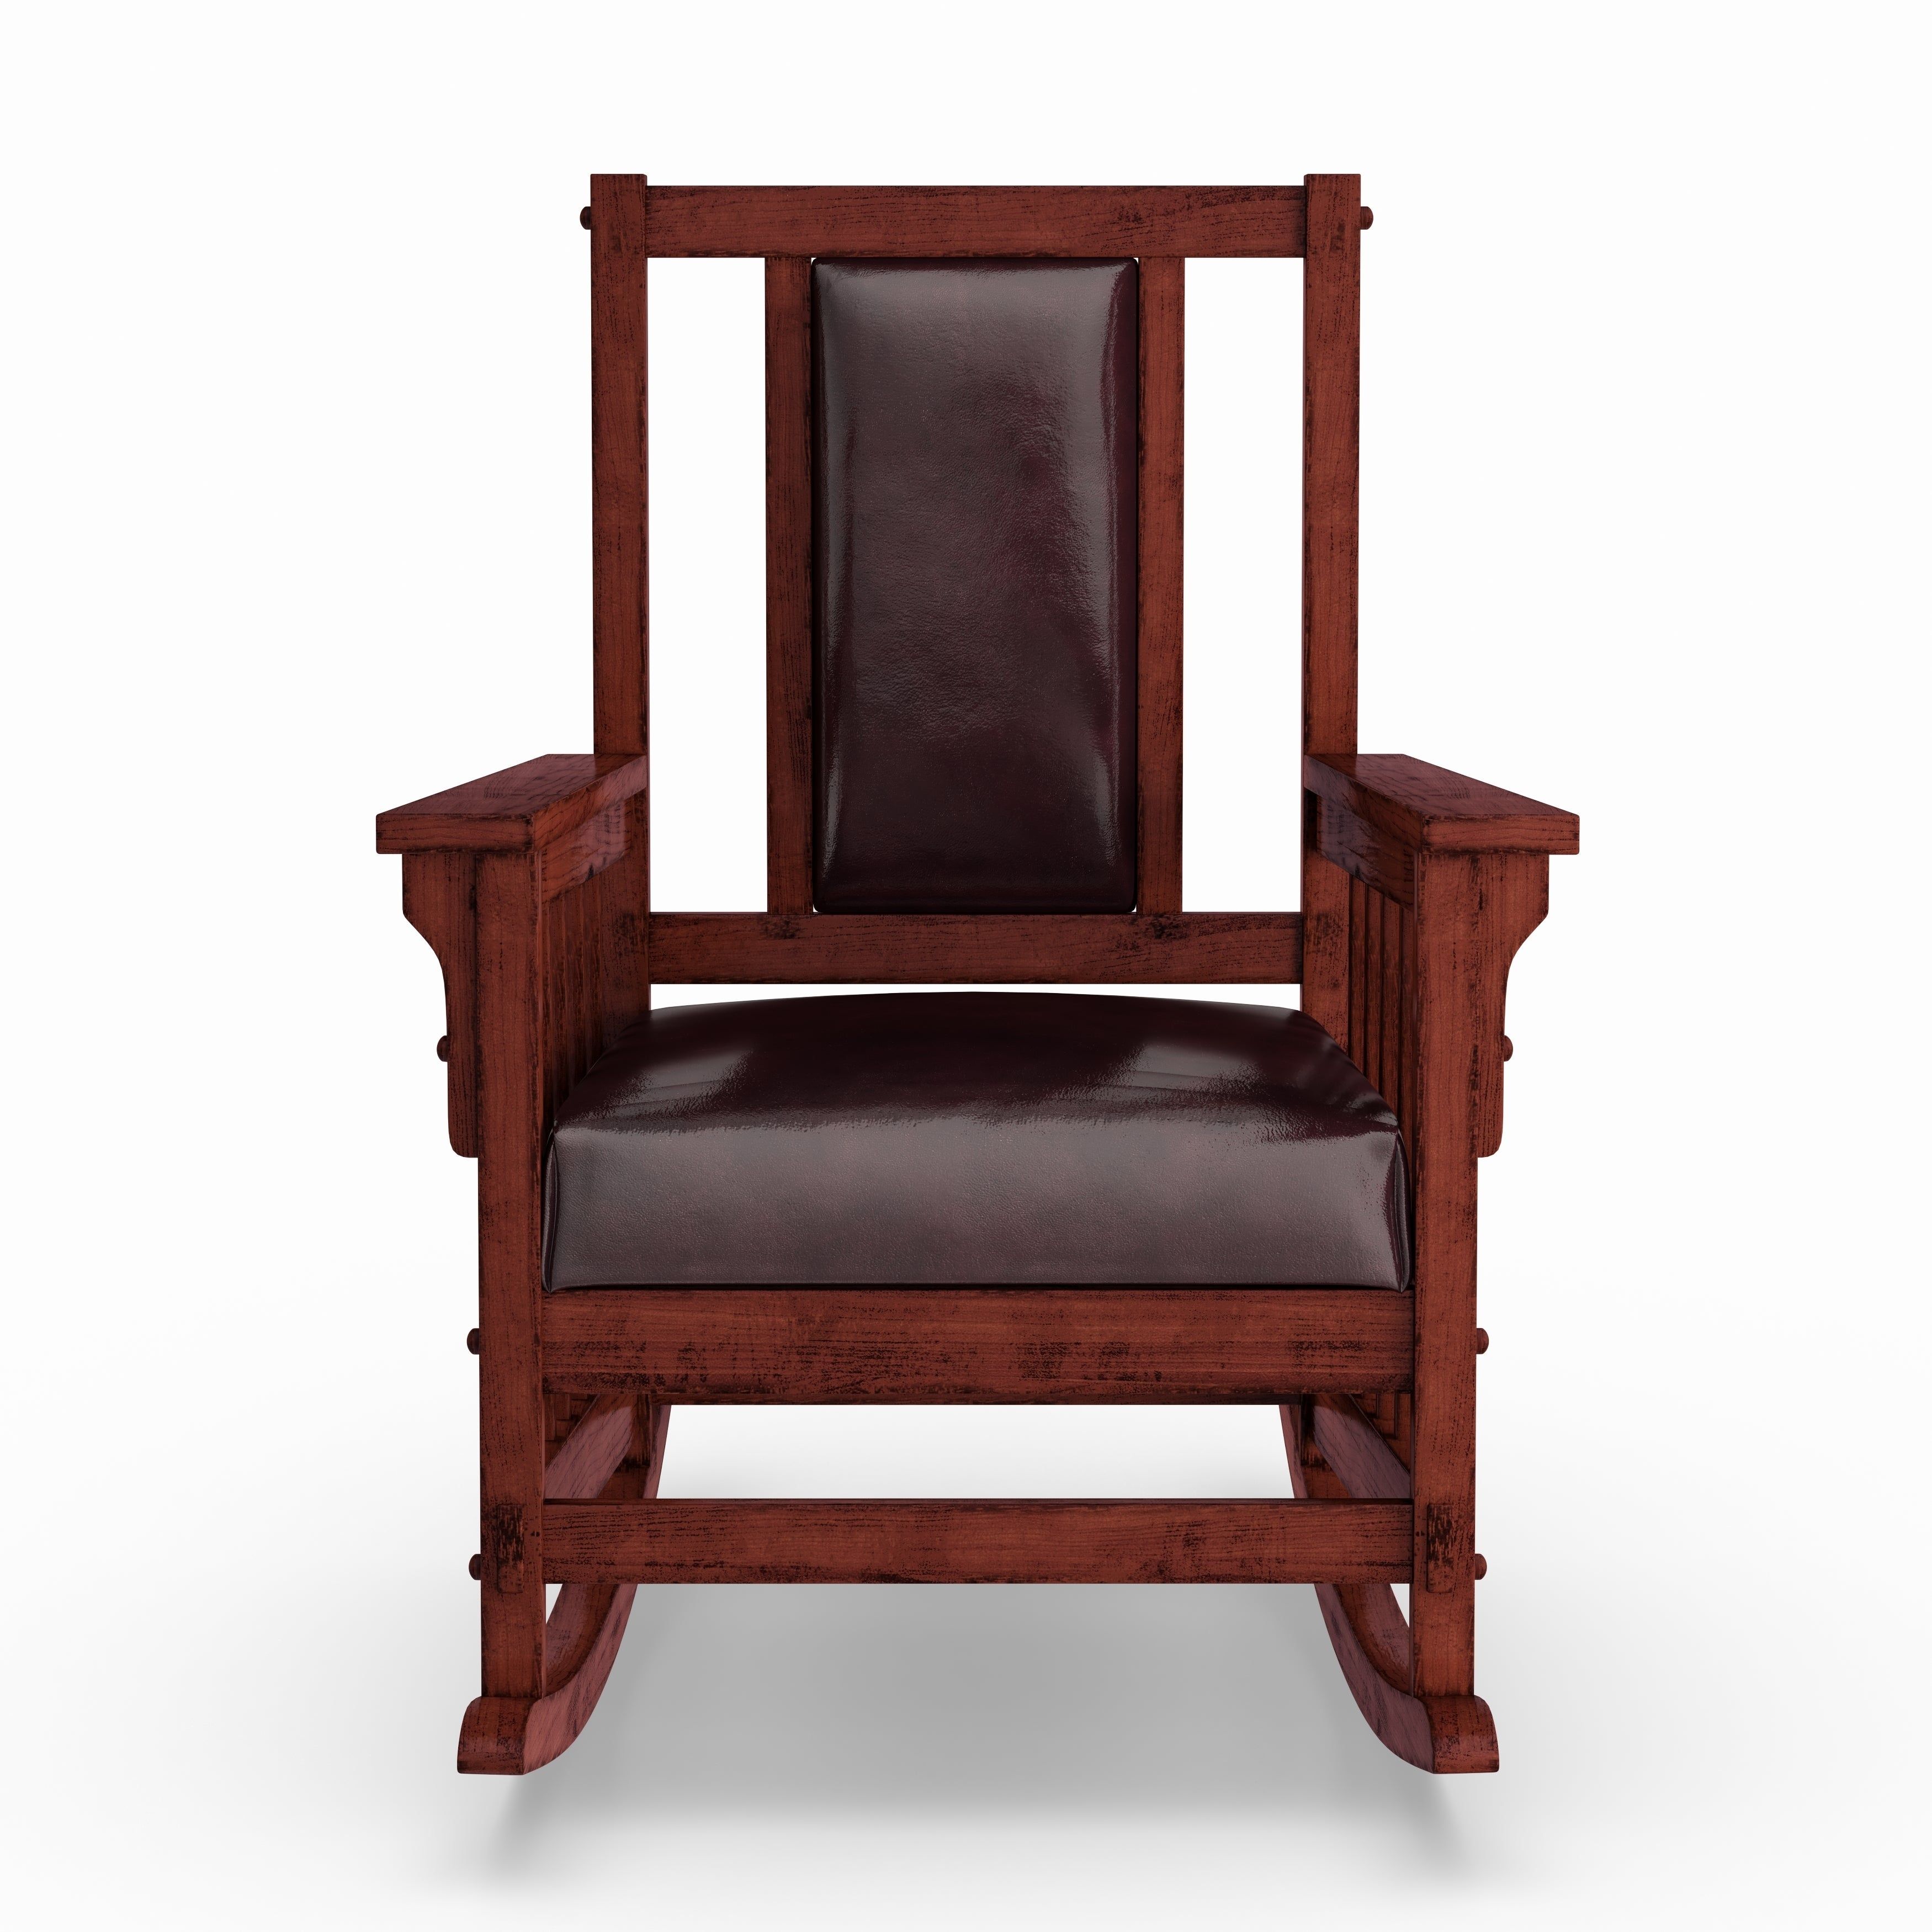 Copper Grove Mesa Verde Dark Oak Wooden Padded Faux Leather Rocking Chair Intended For Dark Oak Wooden Padded Faux Leather Rocking Chairs (View 3 of 20)